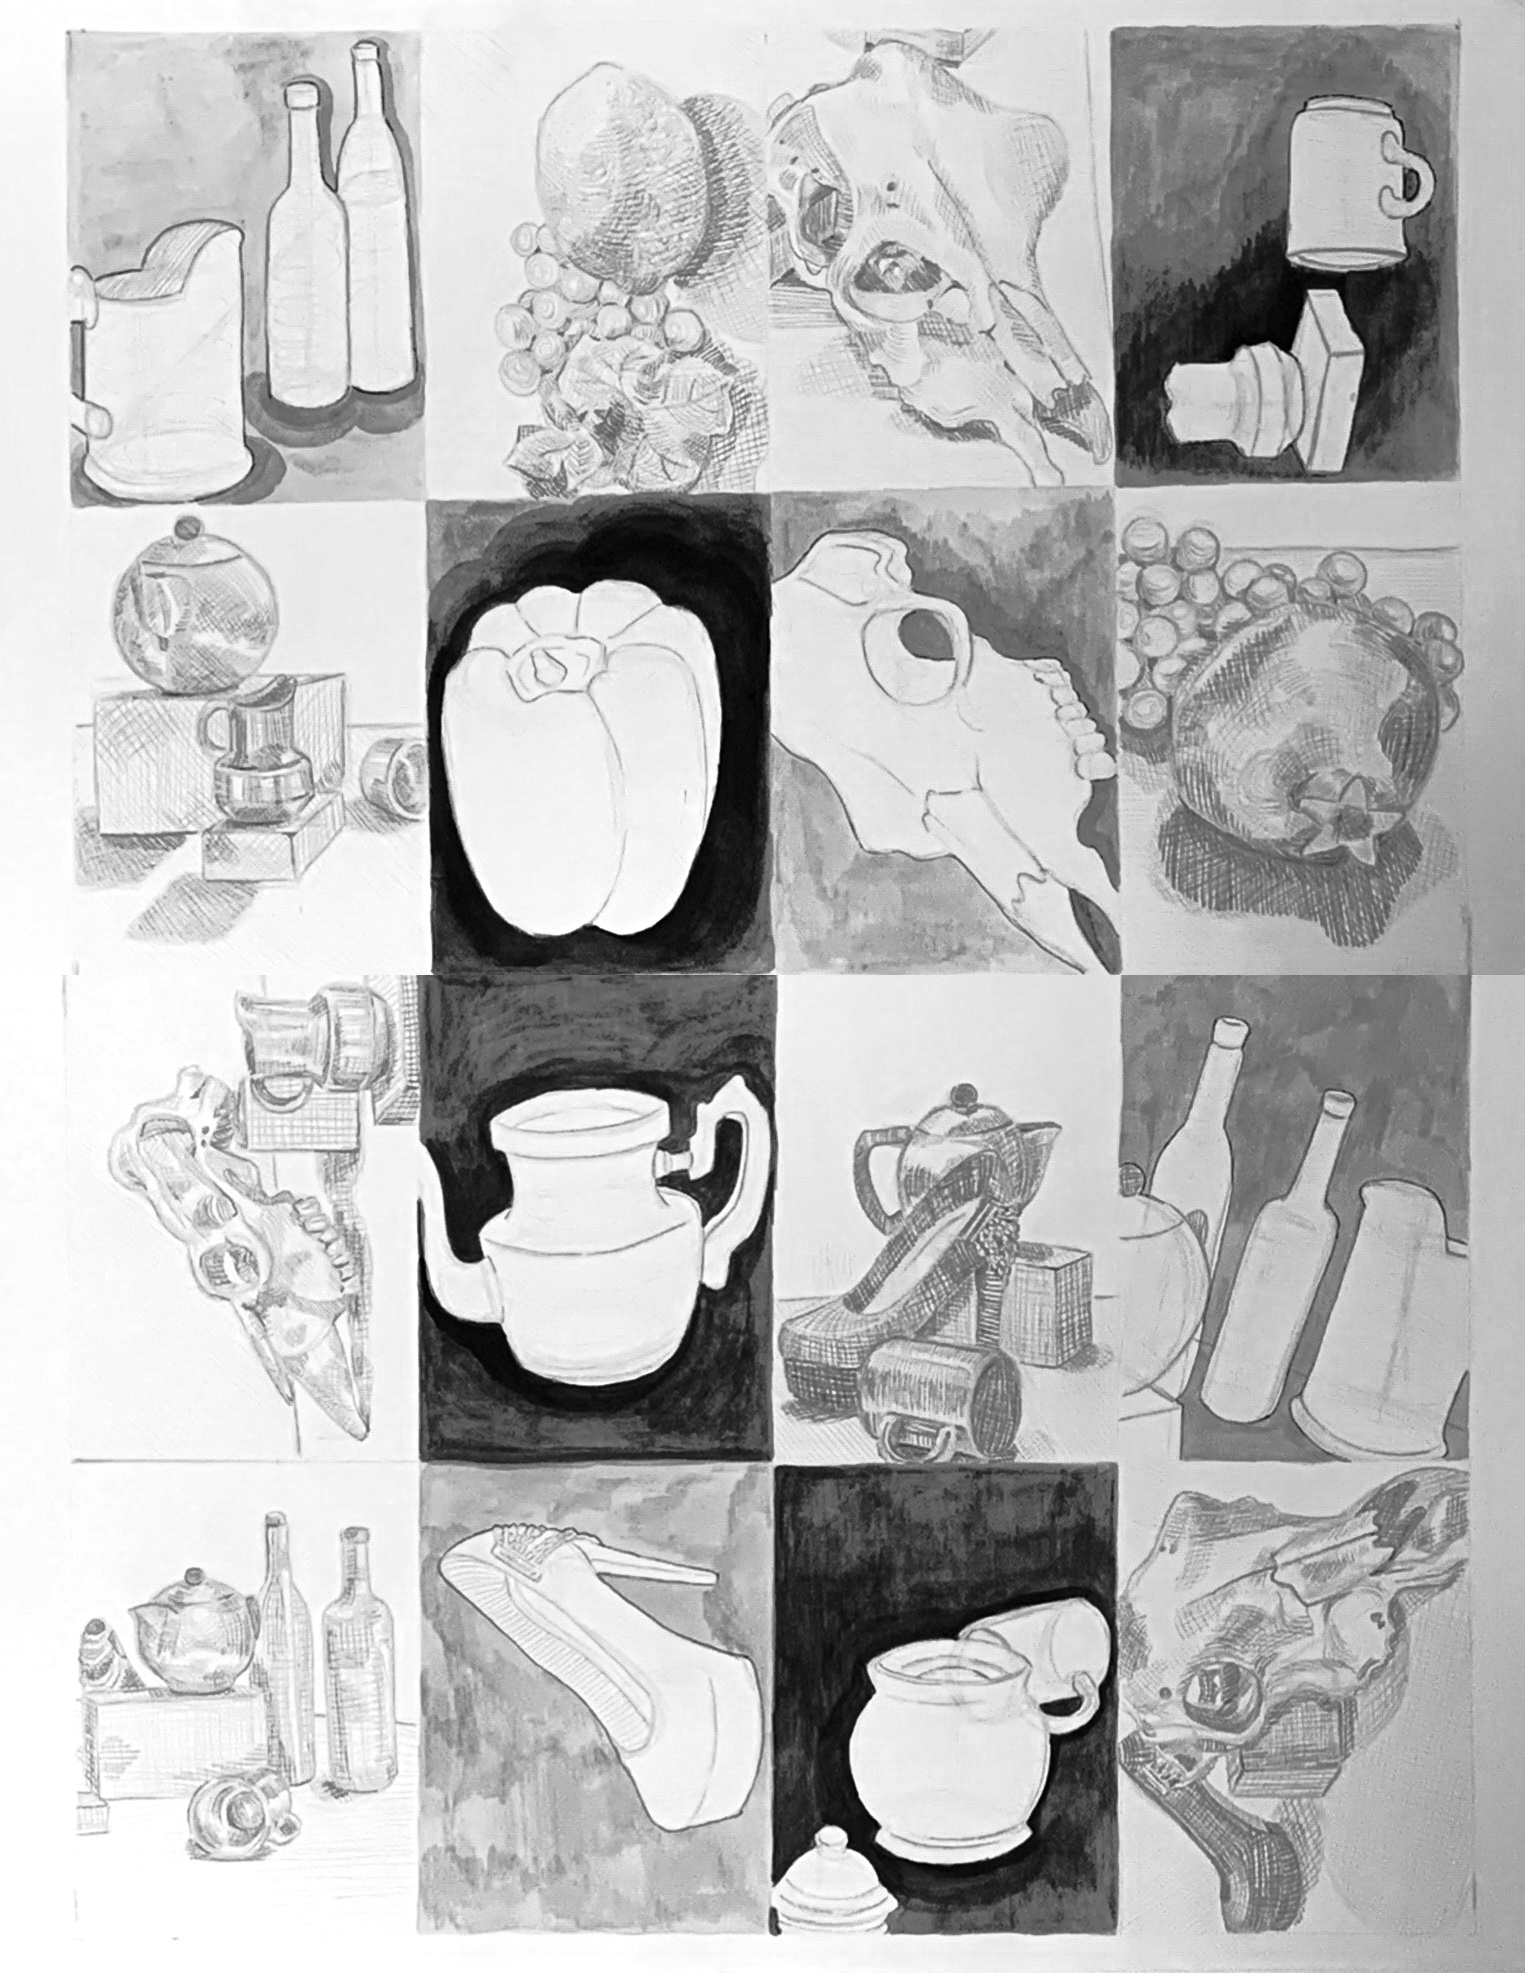 Haley Brotherton, Graphite and India Ink on Paper, 24″ x 18″, Composition and the Grid Drawing, AR100 Drawing I, Spring 2020